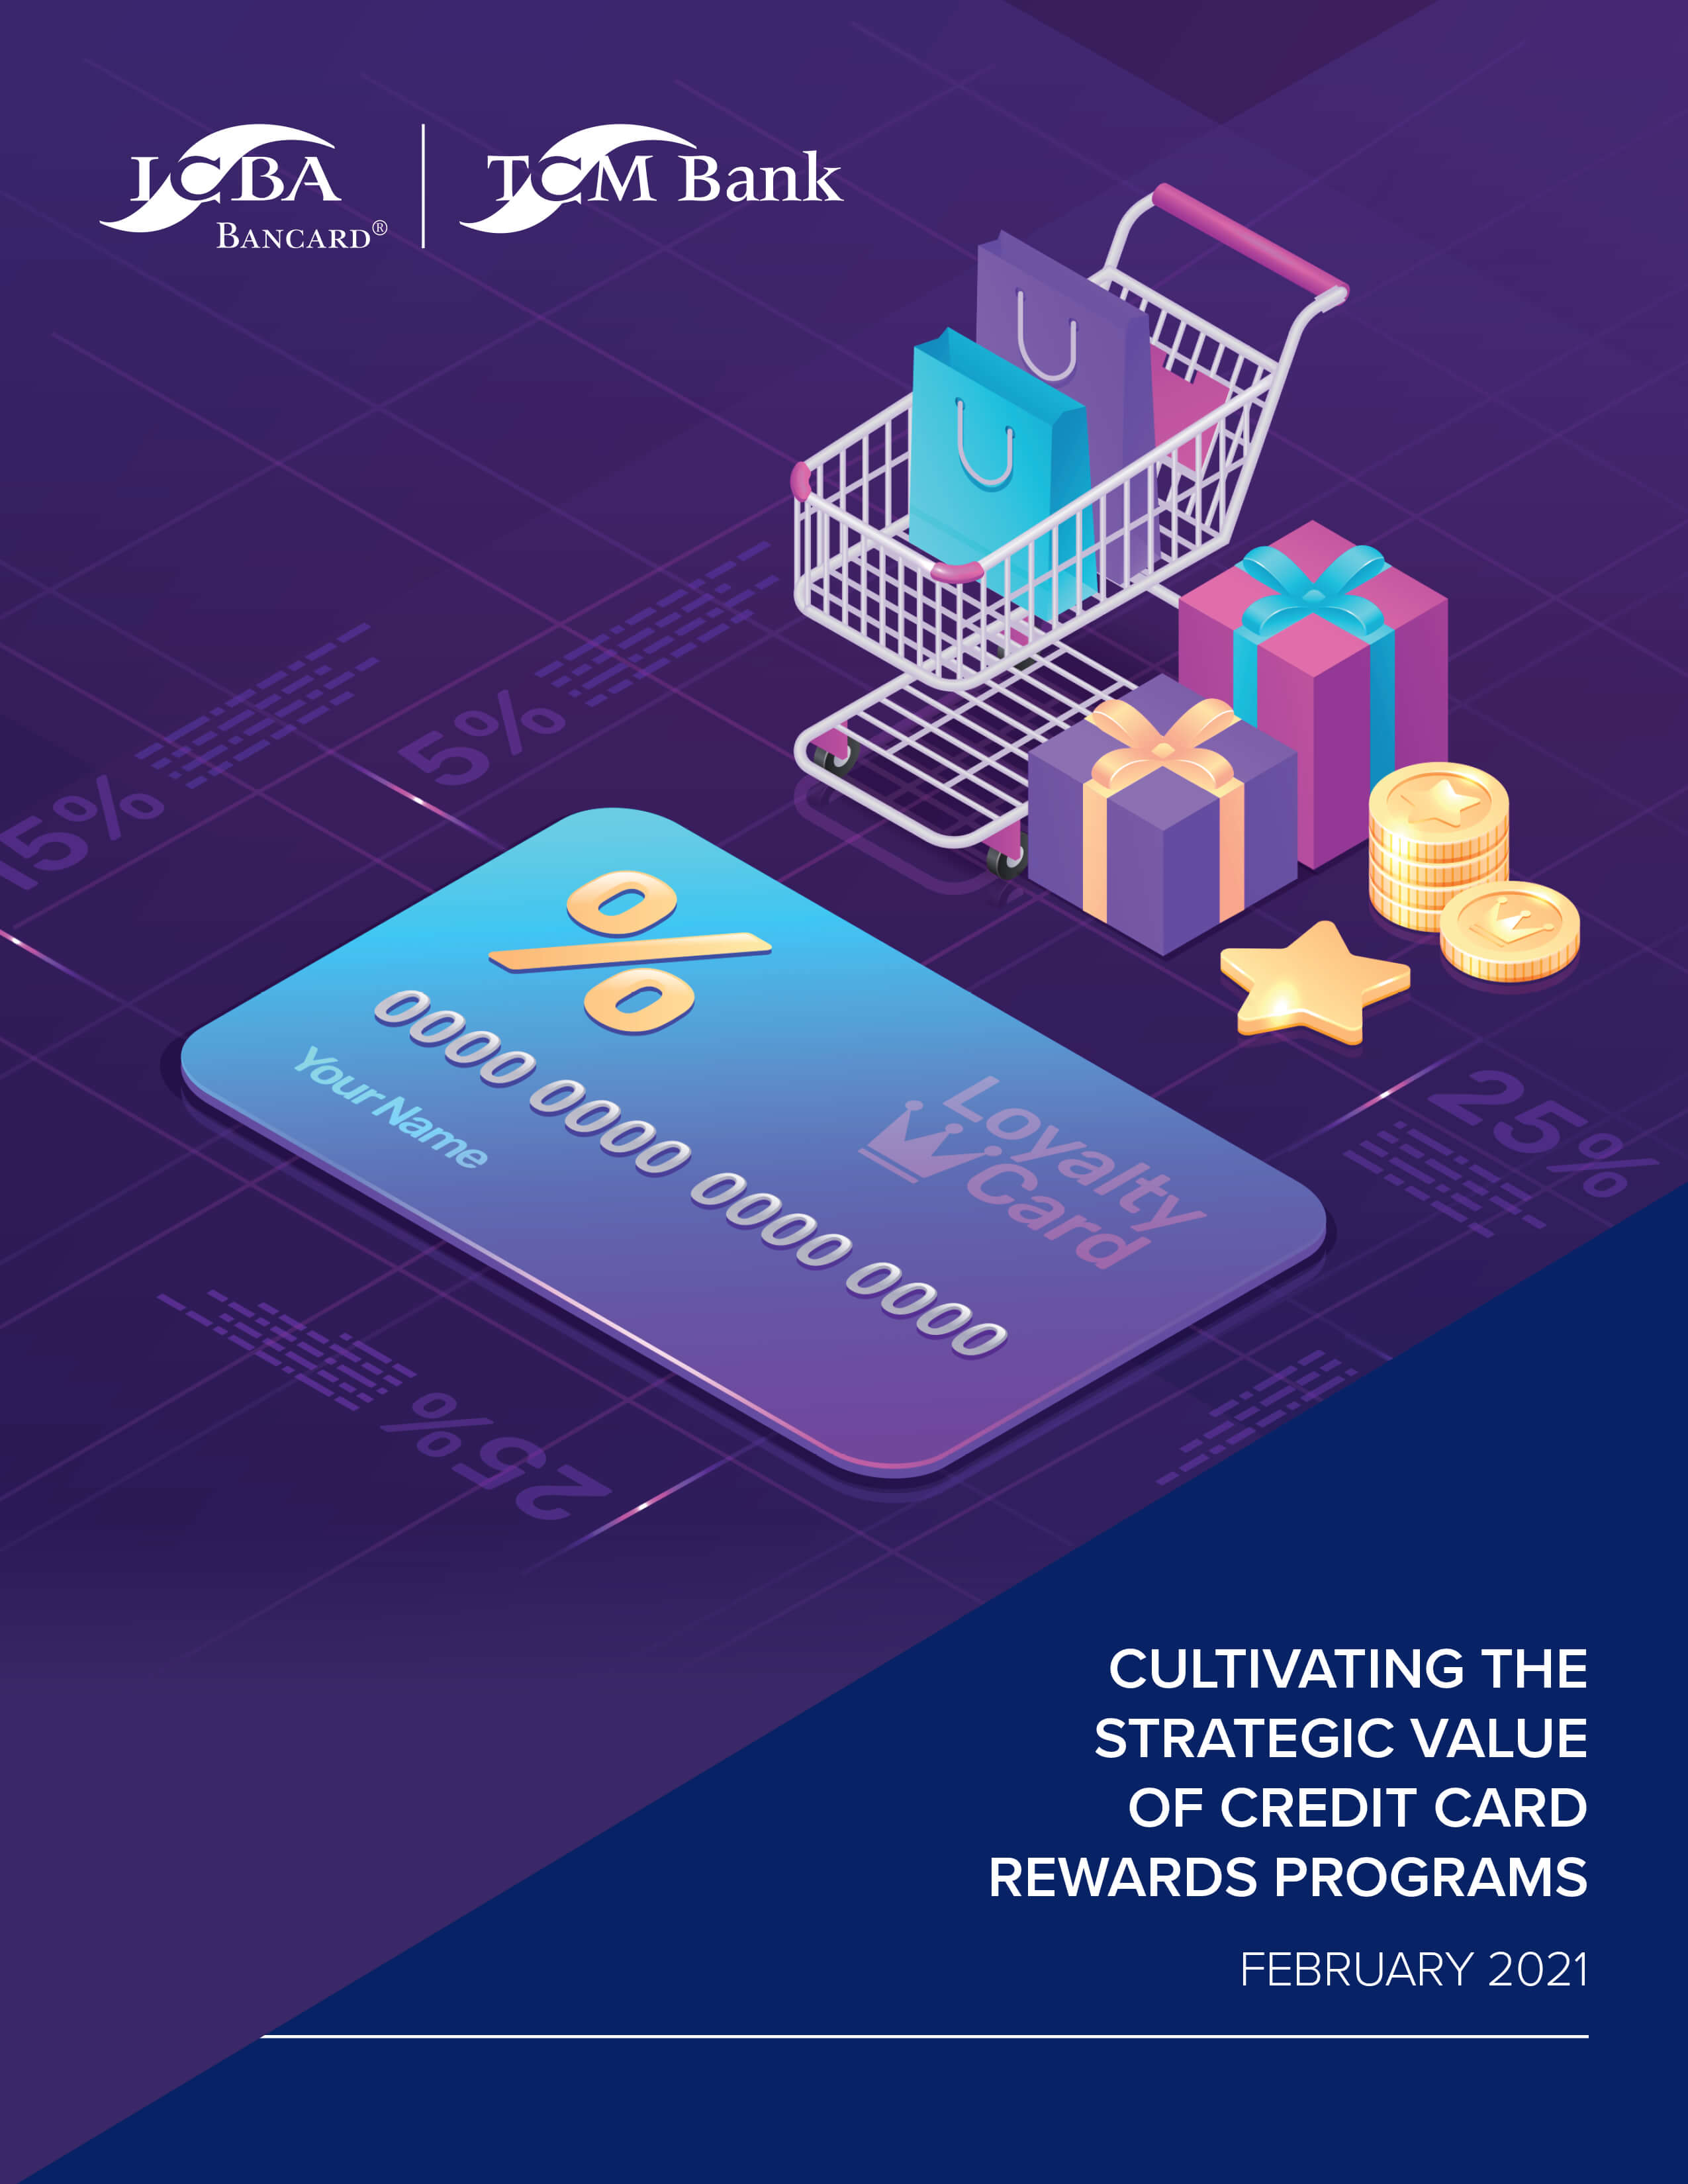 Cultivating the Strategic Value of Credit Card Rewards Programs